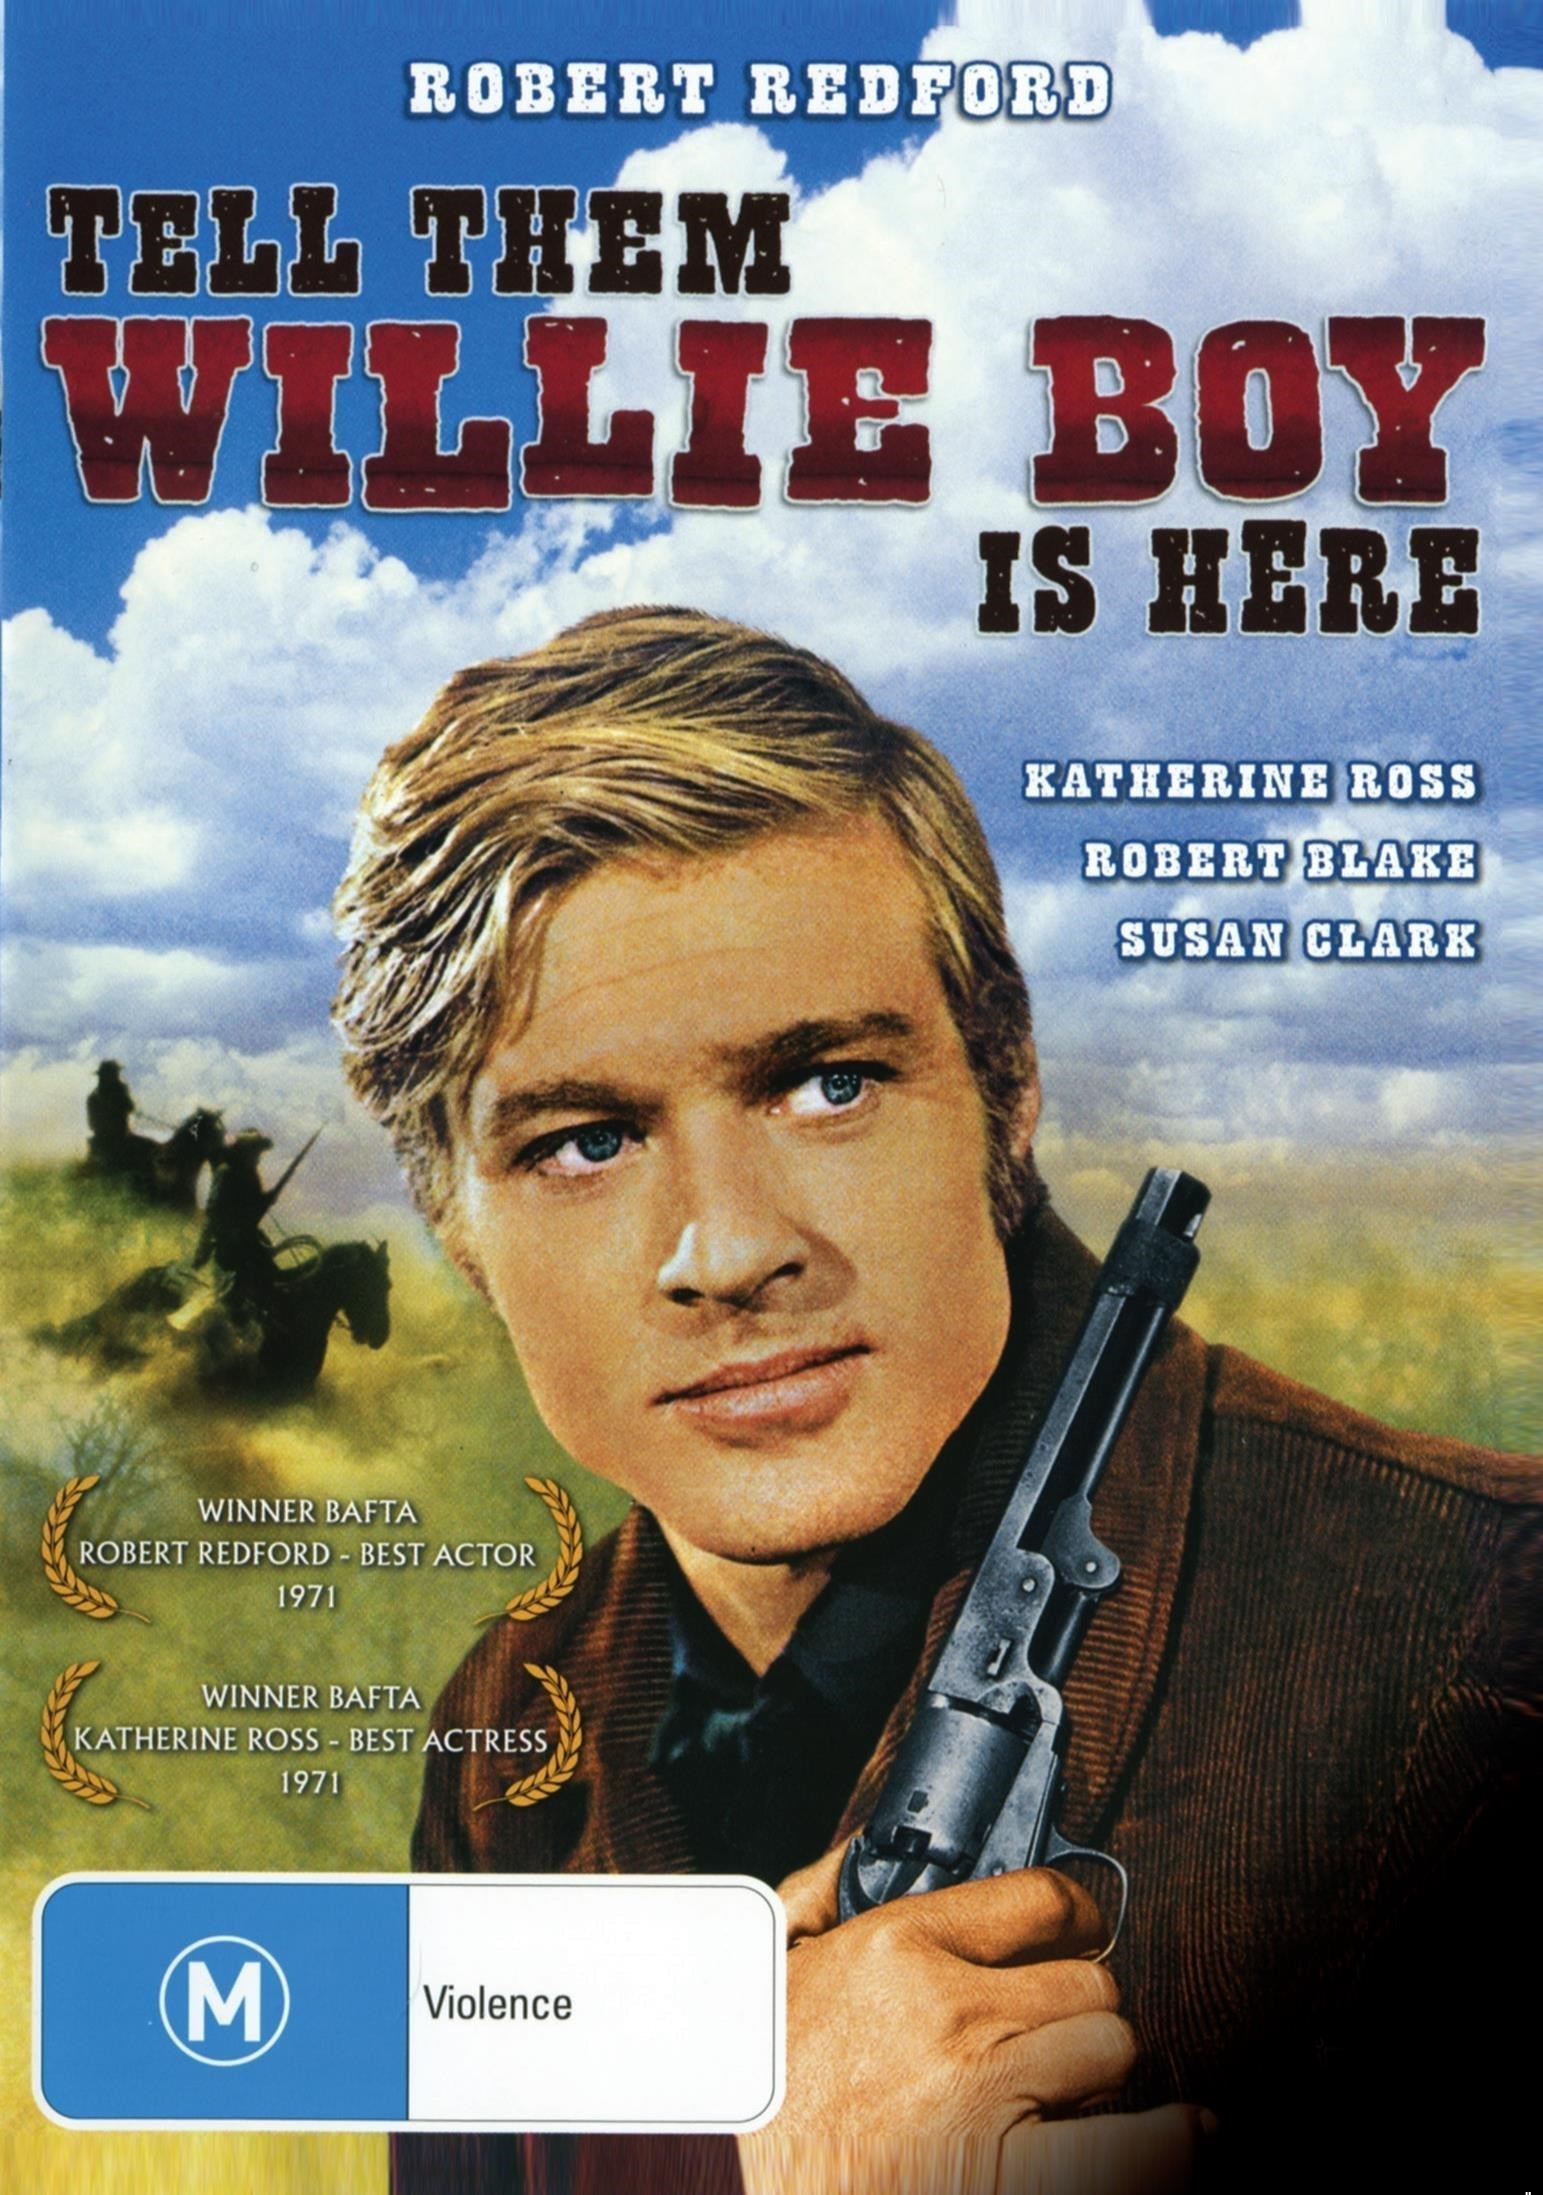 Tell Them Willie Boy Is Here rareandcollectibledvds